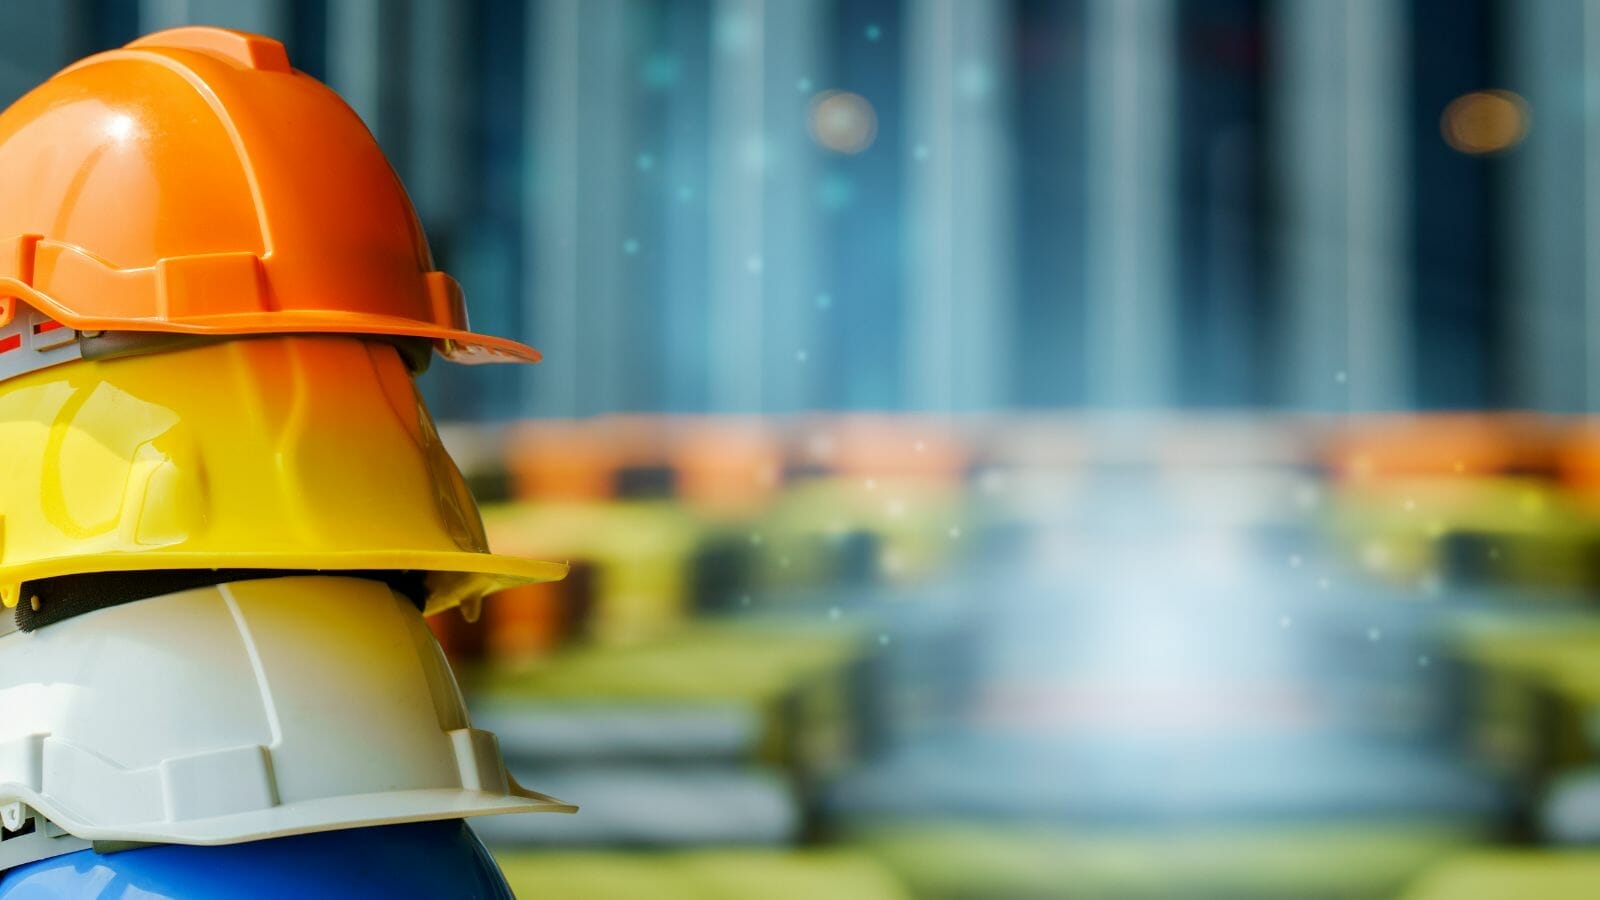 A stack of hard hats illustrating the margin of safety

